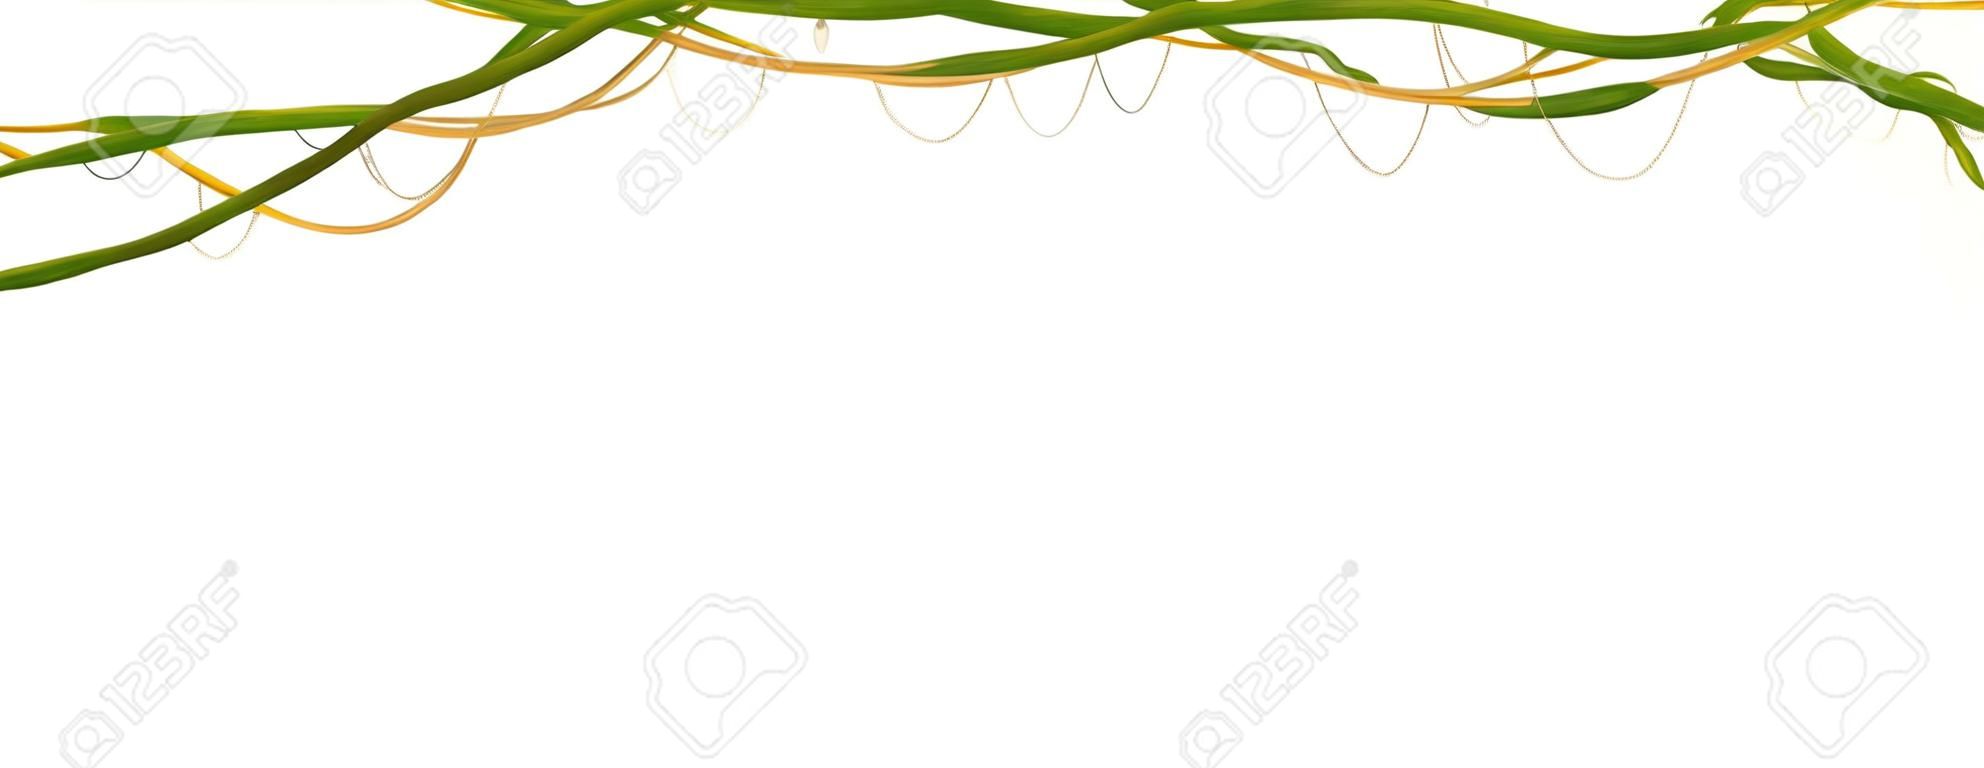 Hanging vine branches. Tropical jungle and plants on white background.